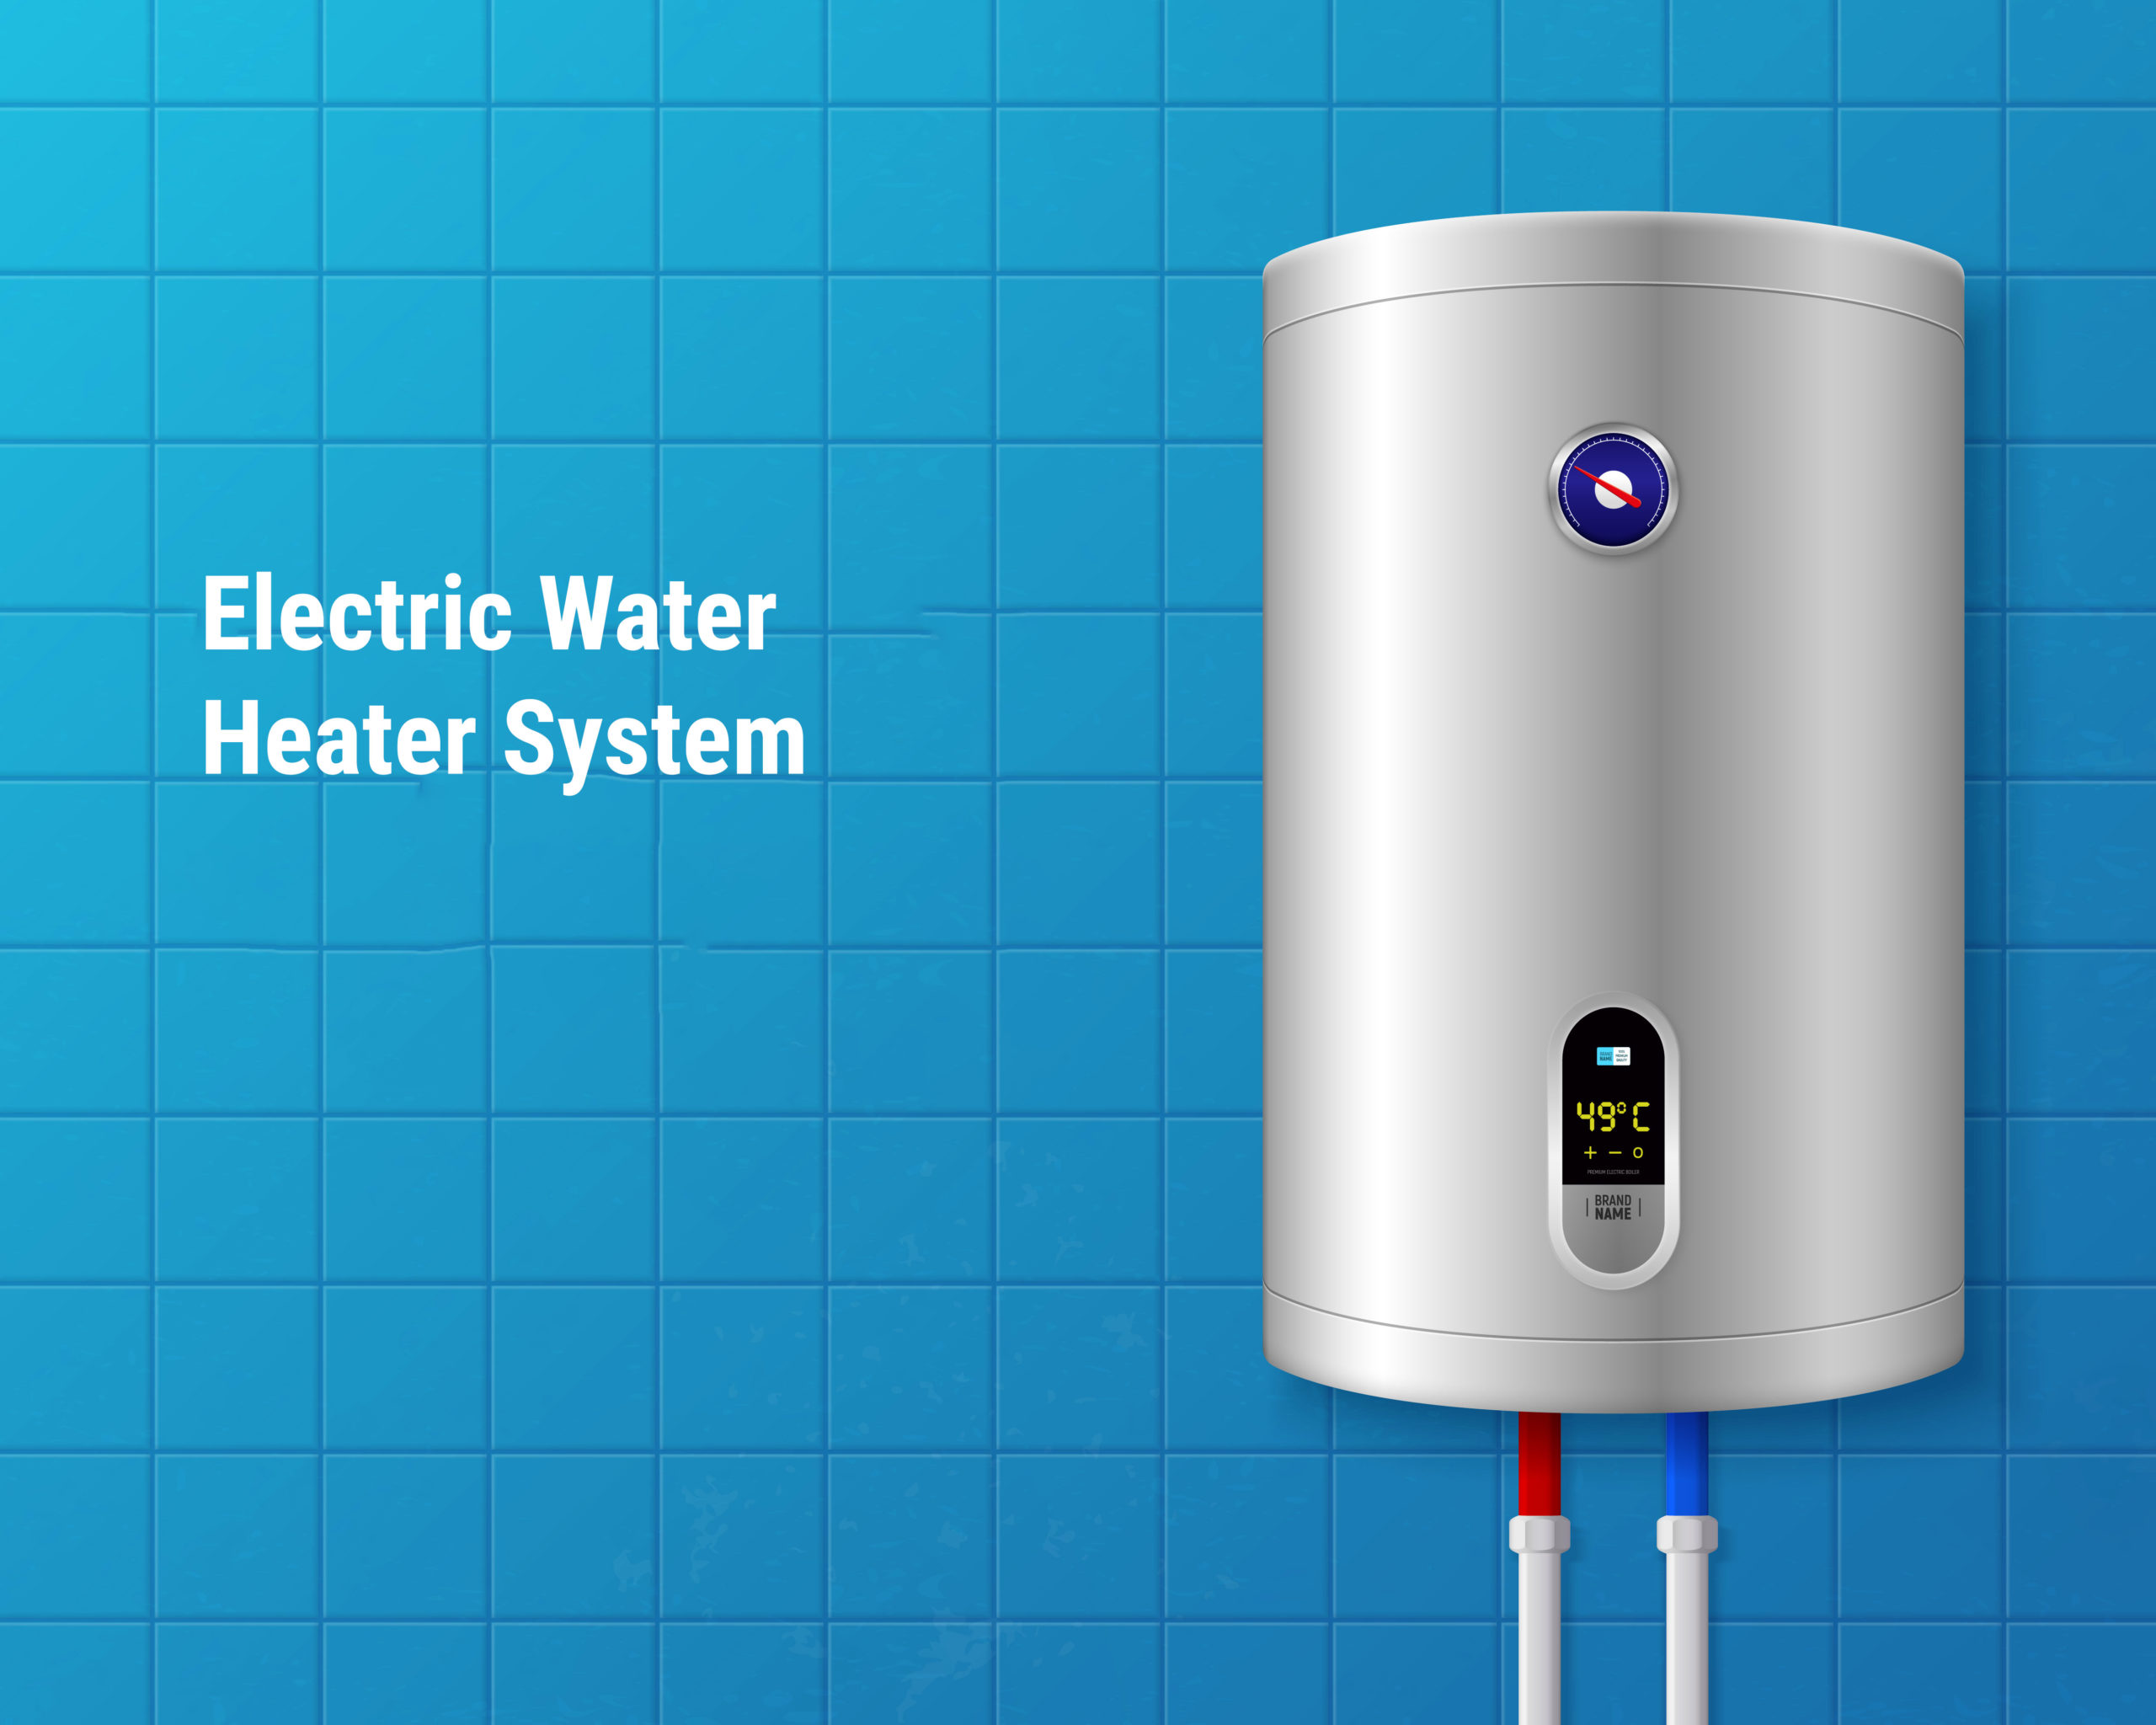 Choosing the Right Hot Water System for Your Caravan